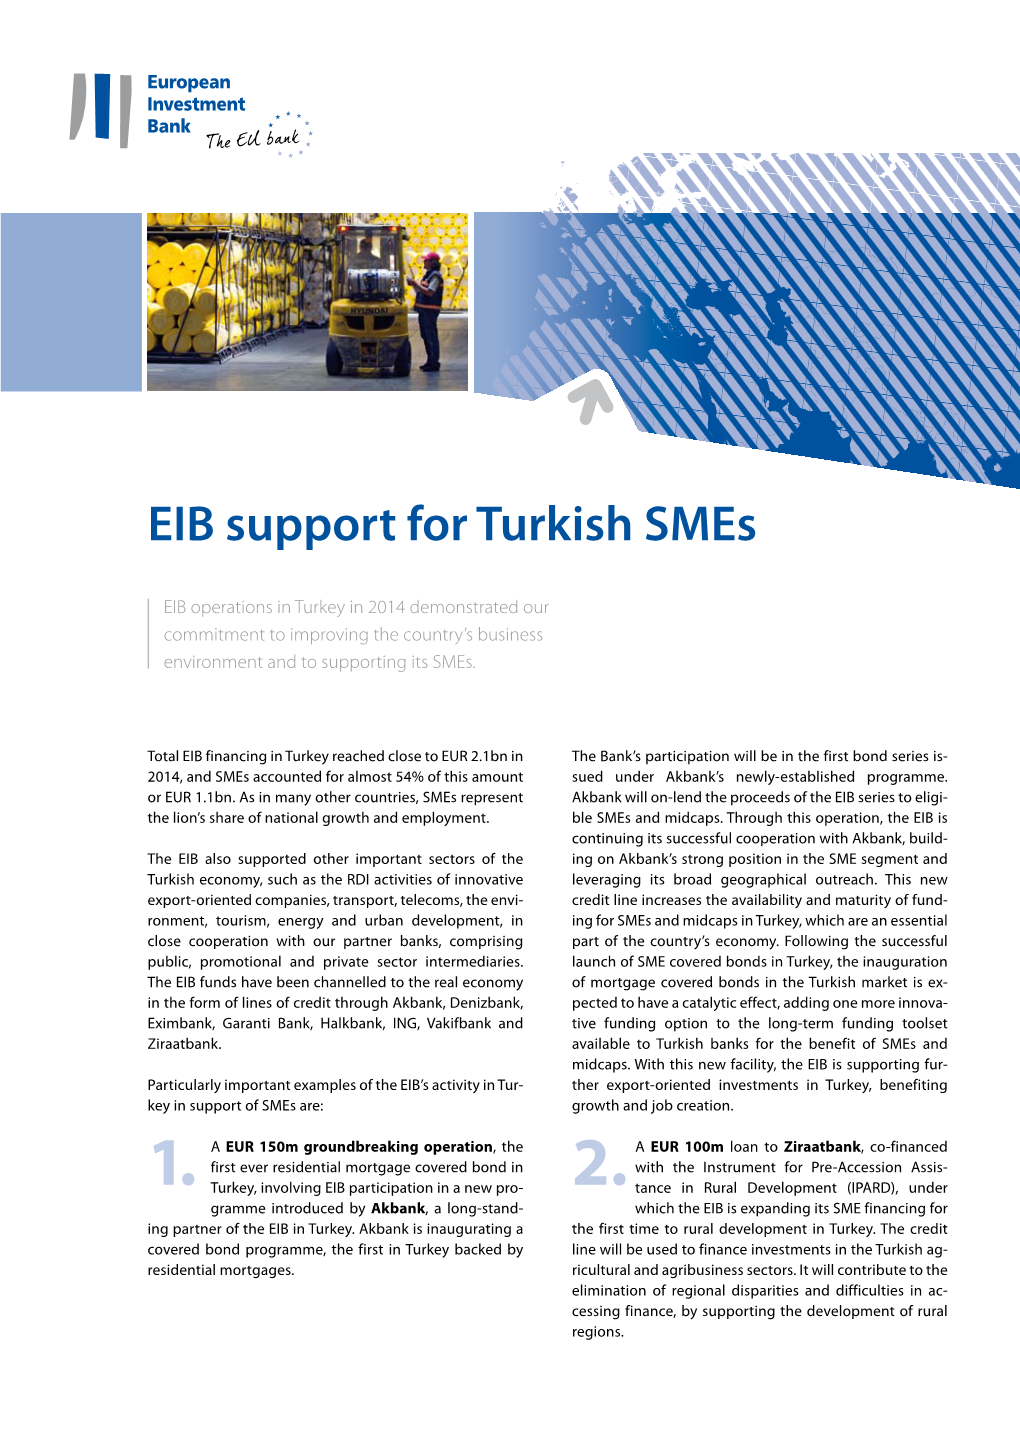 EIB Support for Turkish Smes